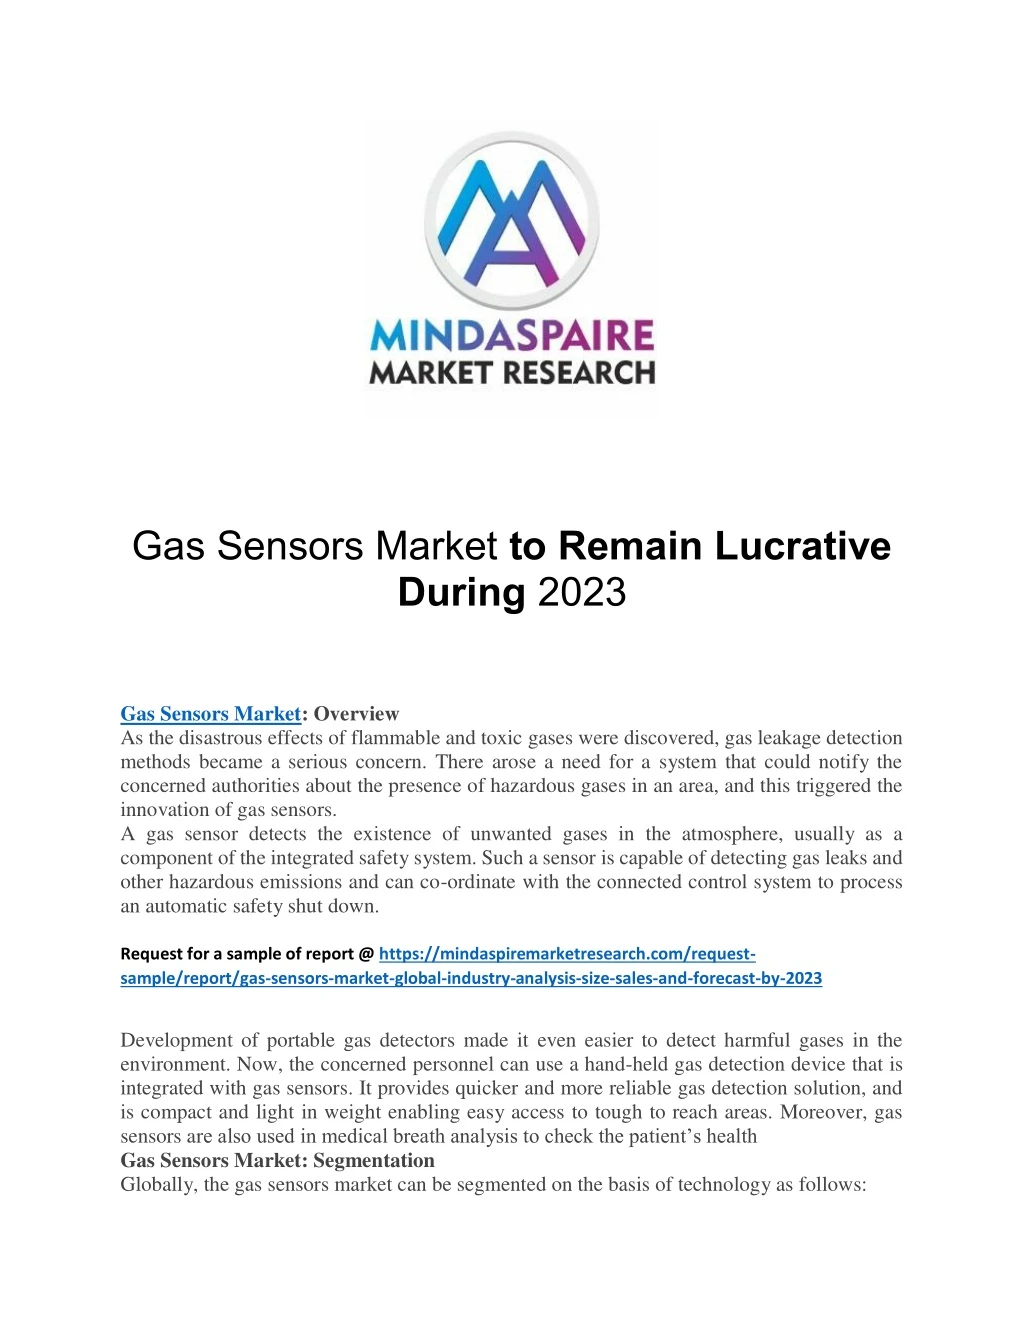 gas sensors market to remain lucrative during 2023